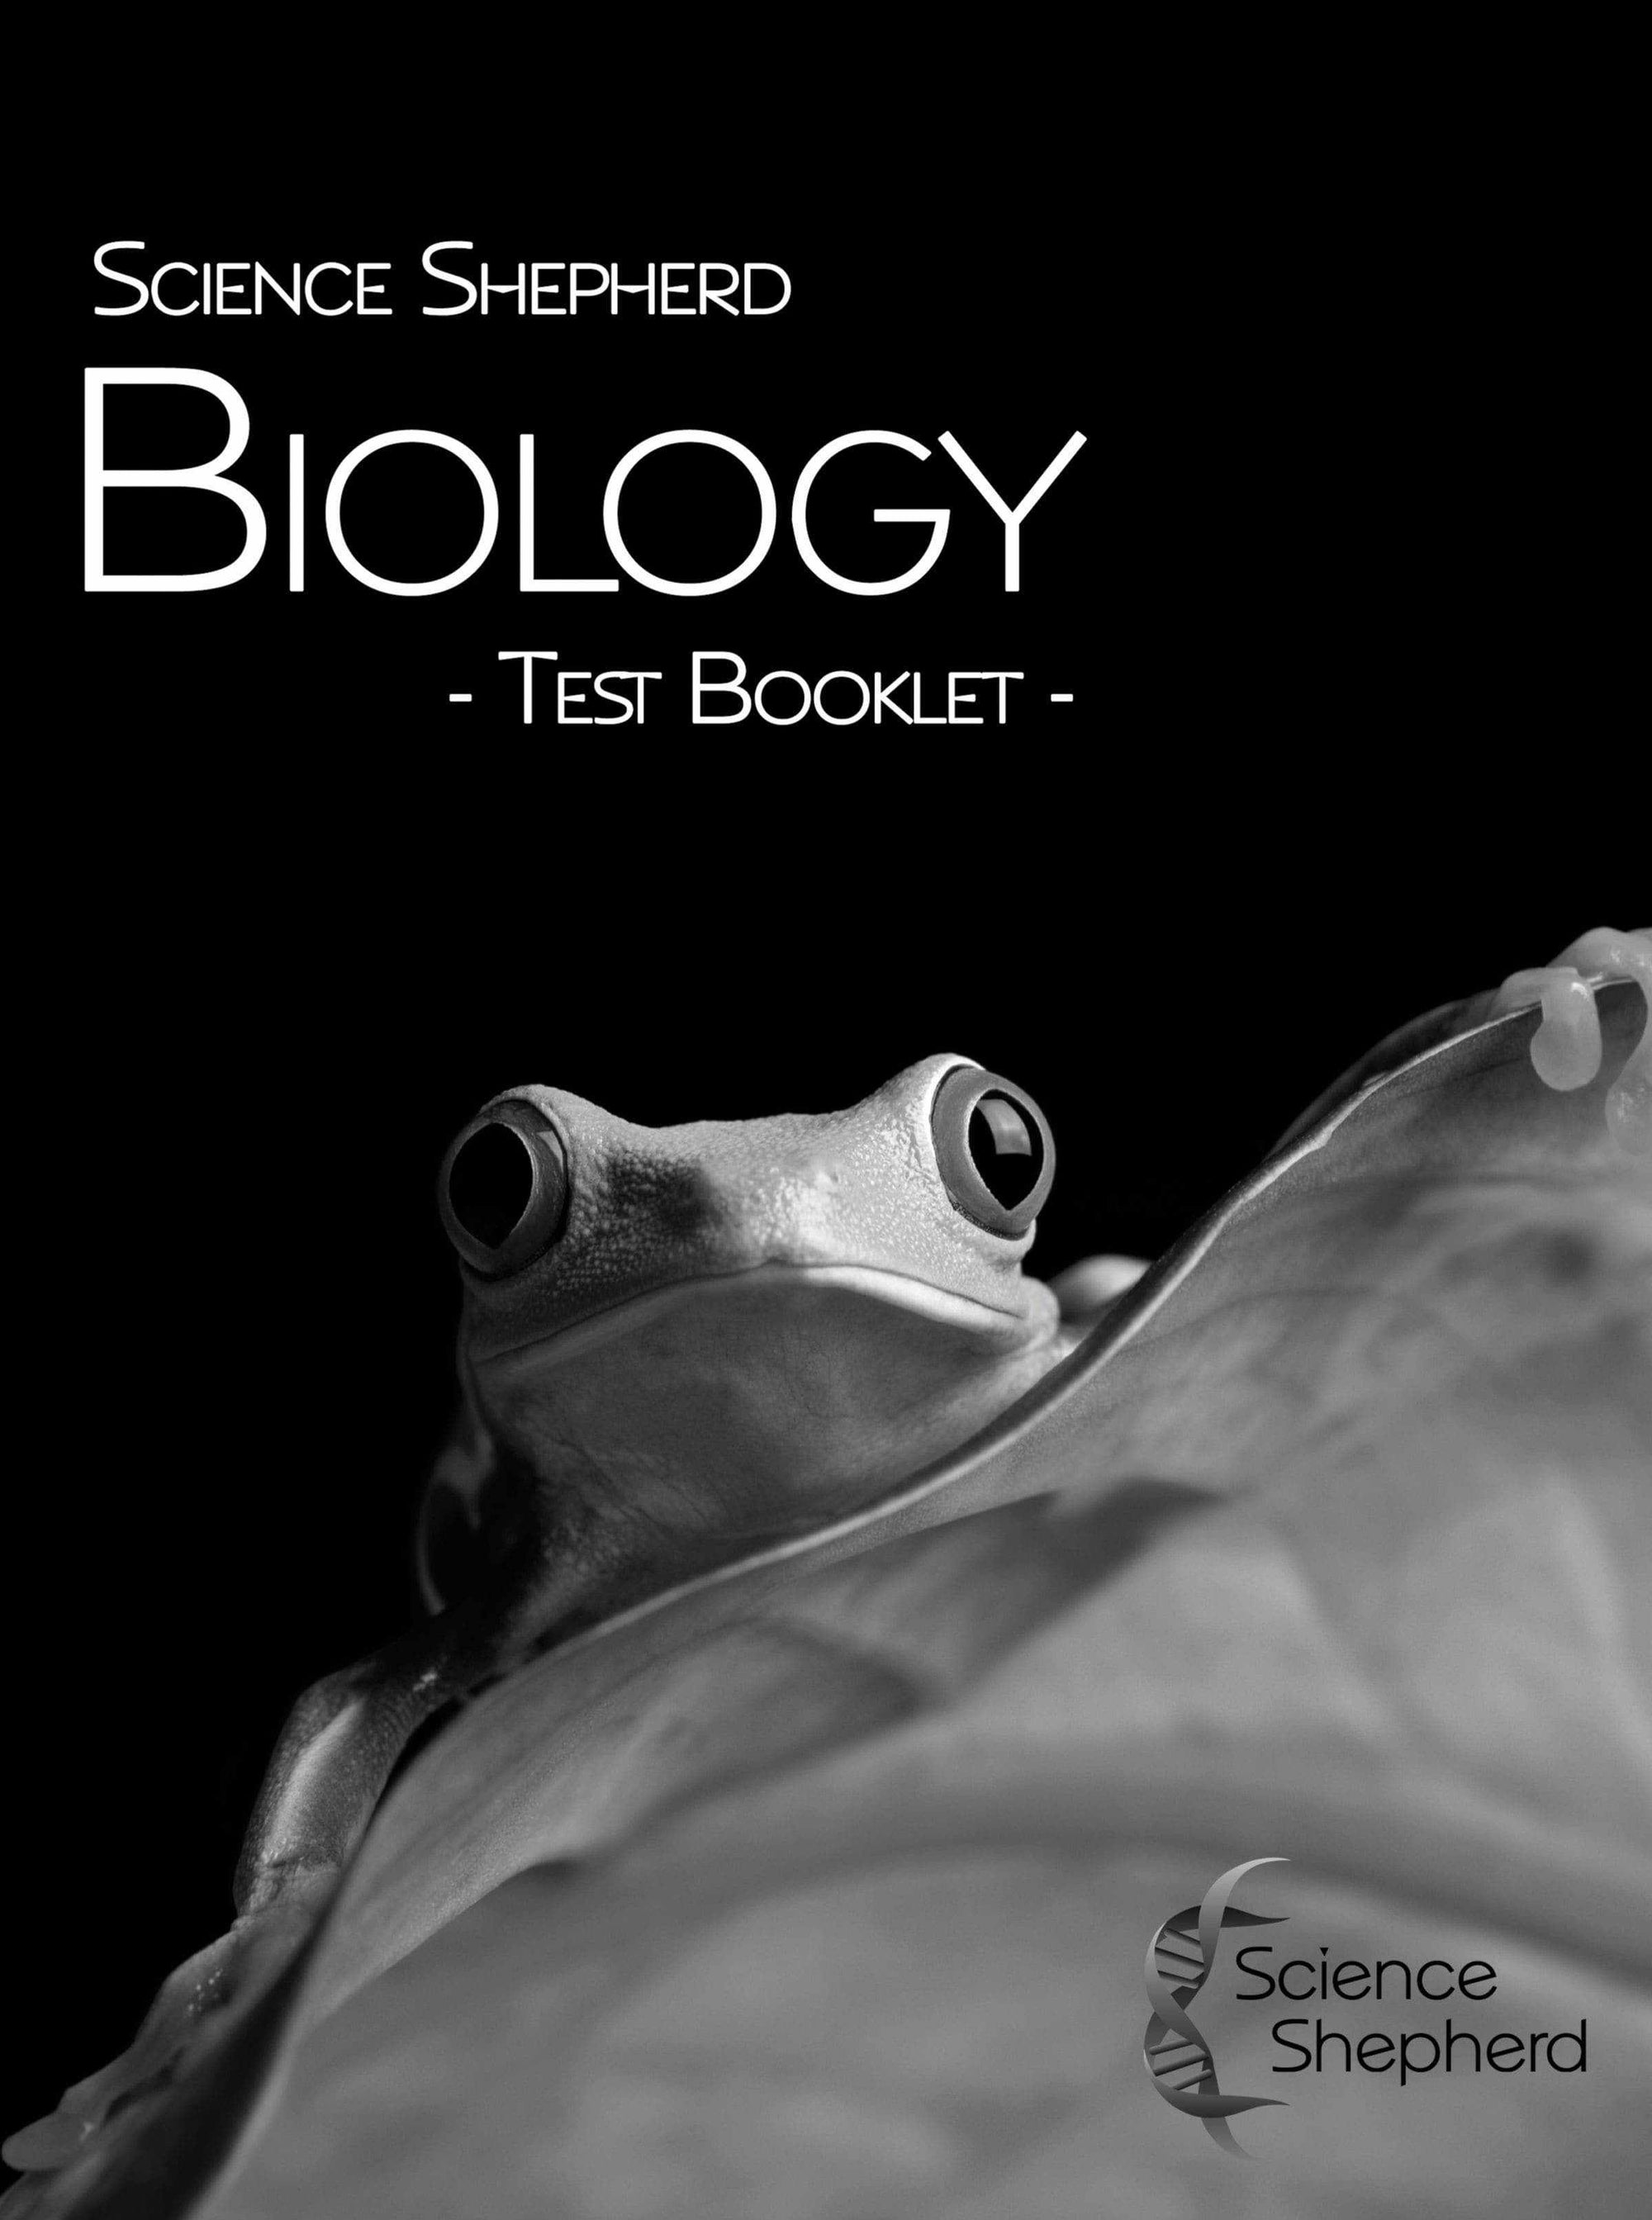 Cover for the 1st Edition Test Booklet for high school biology in your home